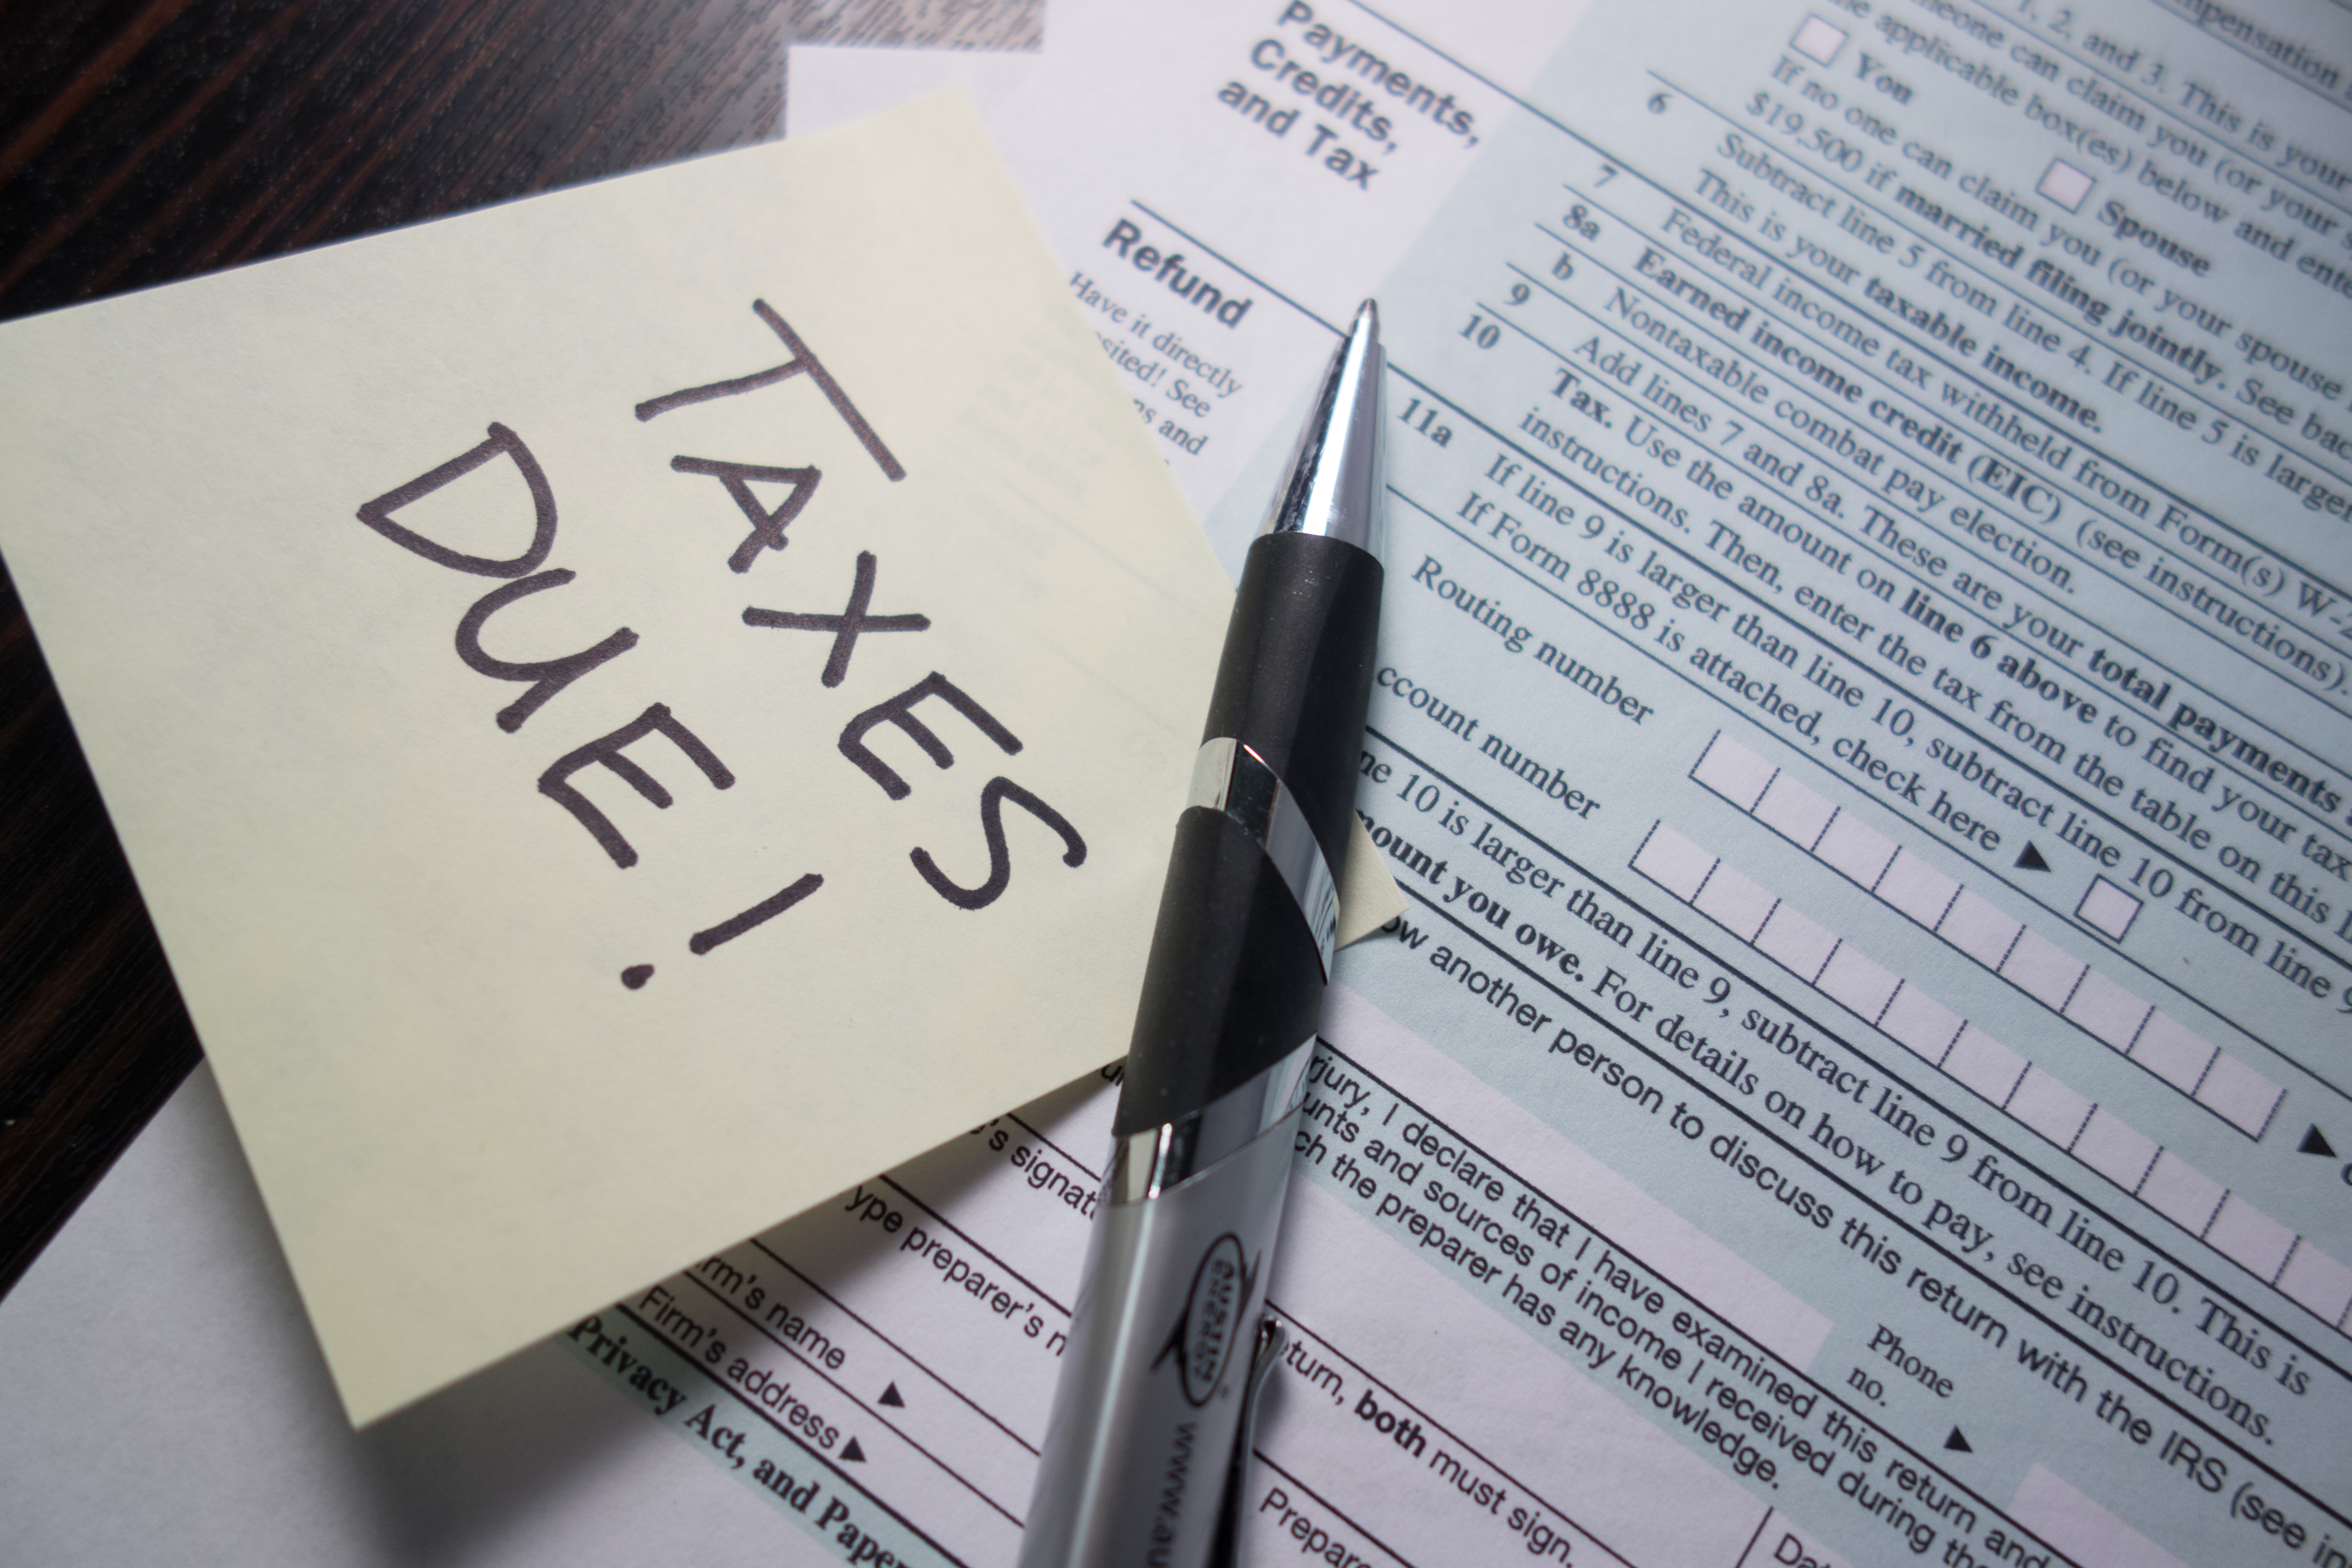 Tax Due Date Changes for the 2017 Filing Season (12/31/2016 YearEnd